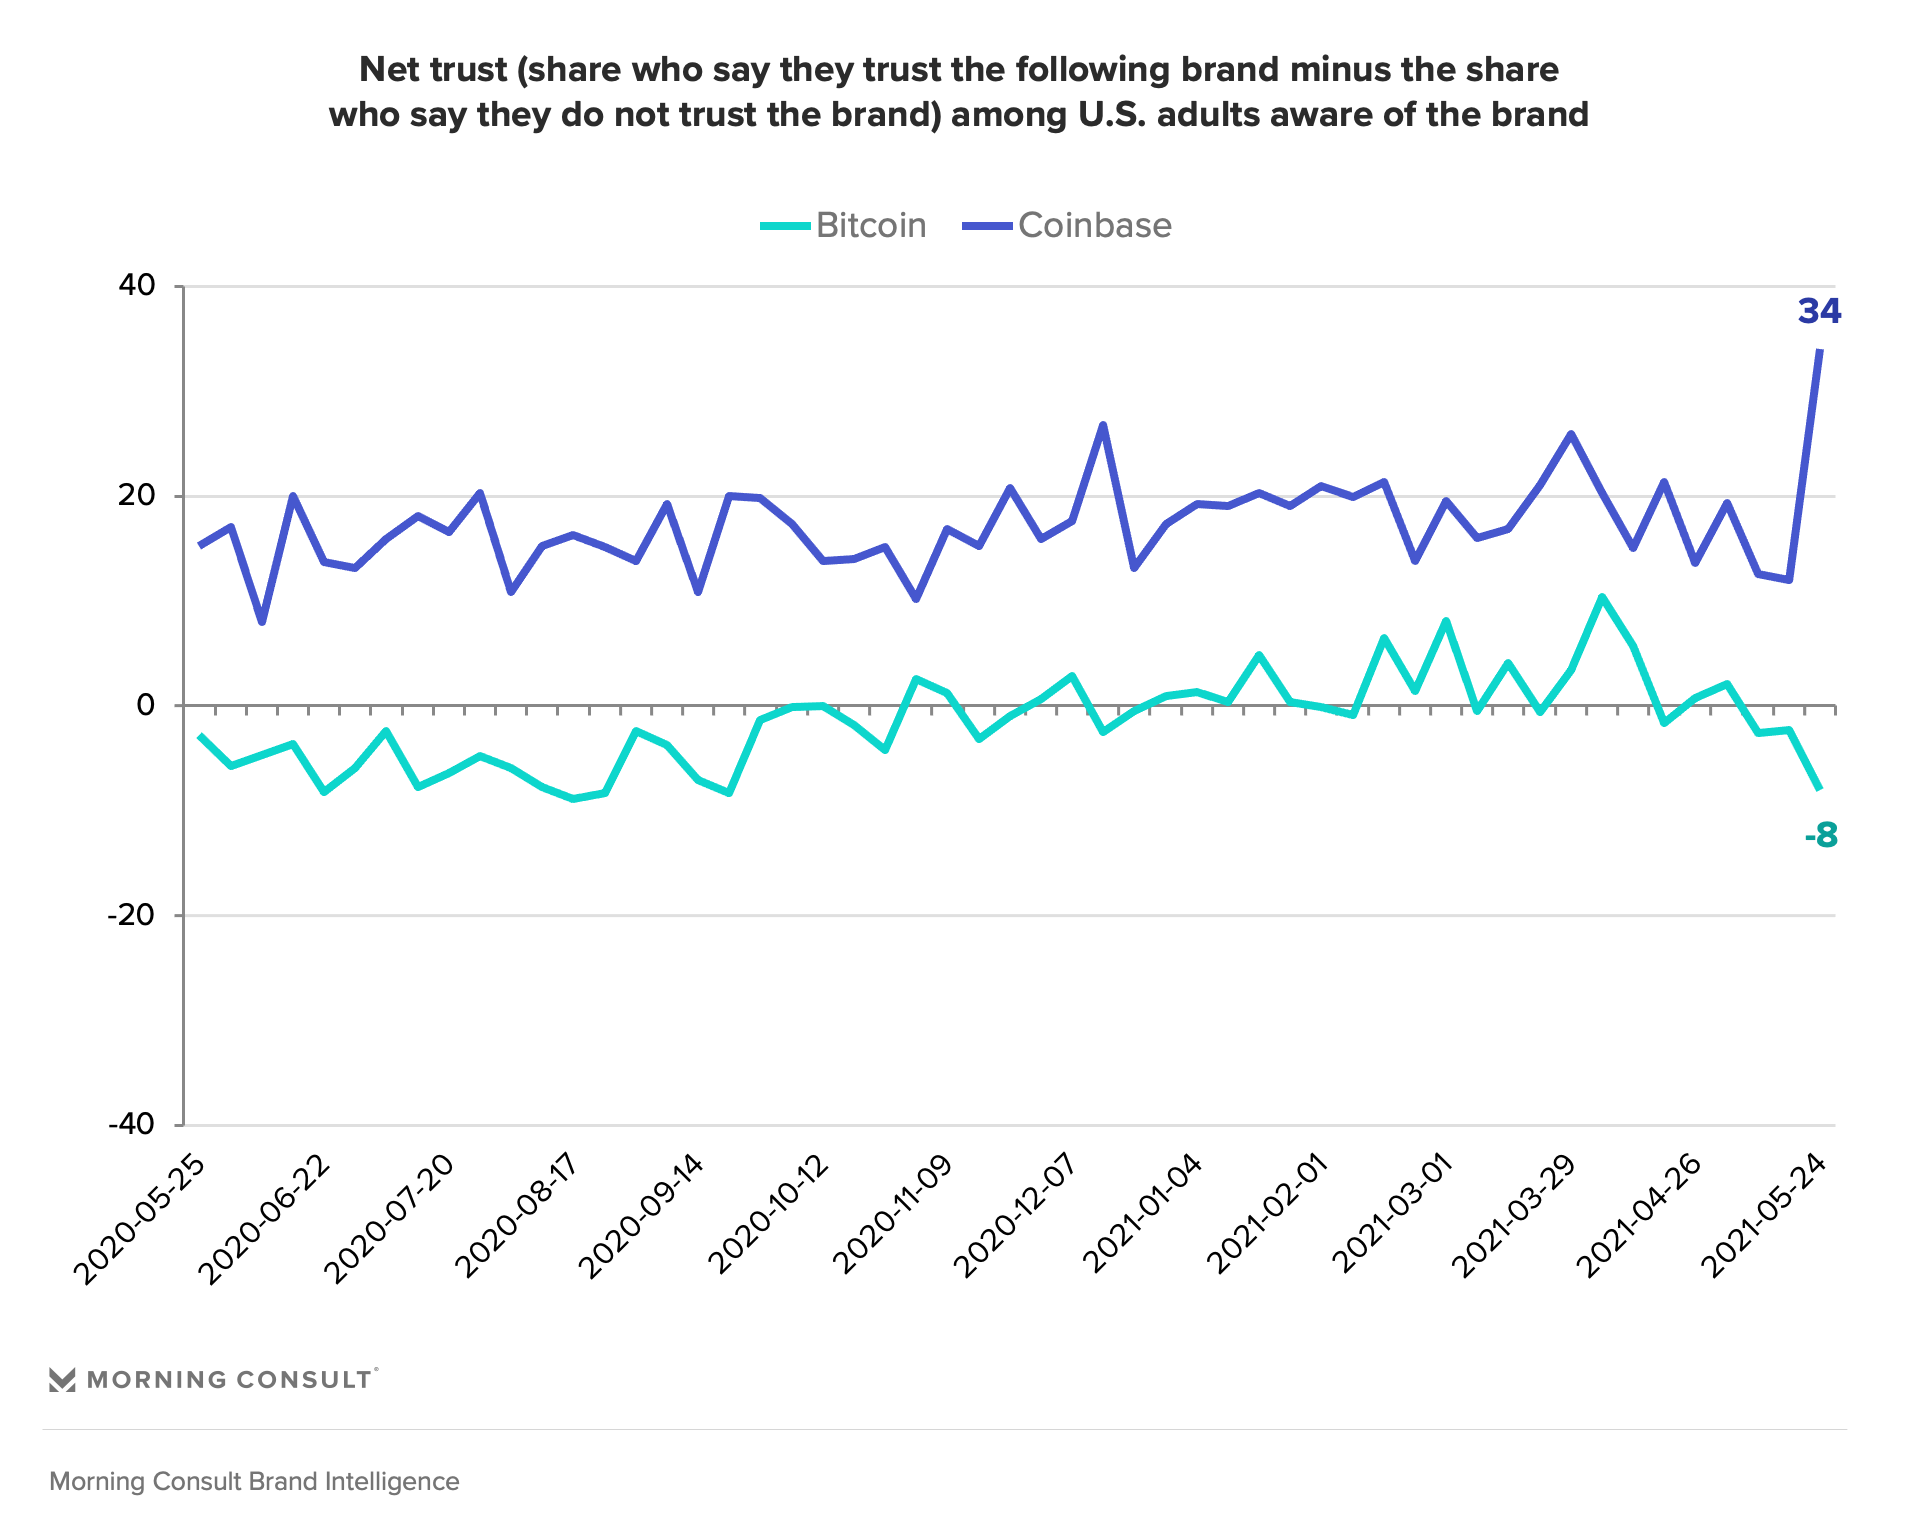 Trend chart showing net trust in Bitcoin, Coinbase among U.S. adults